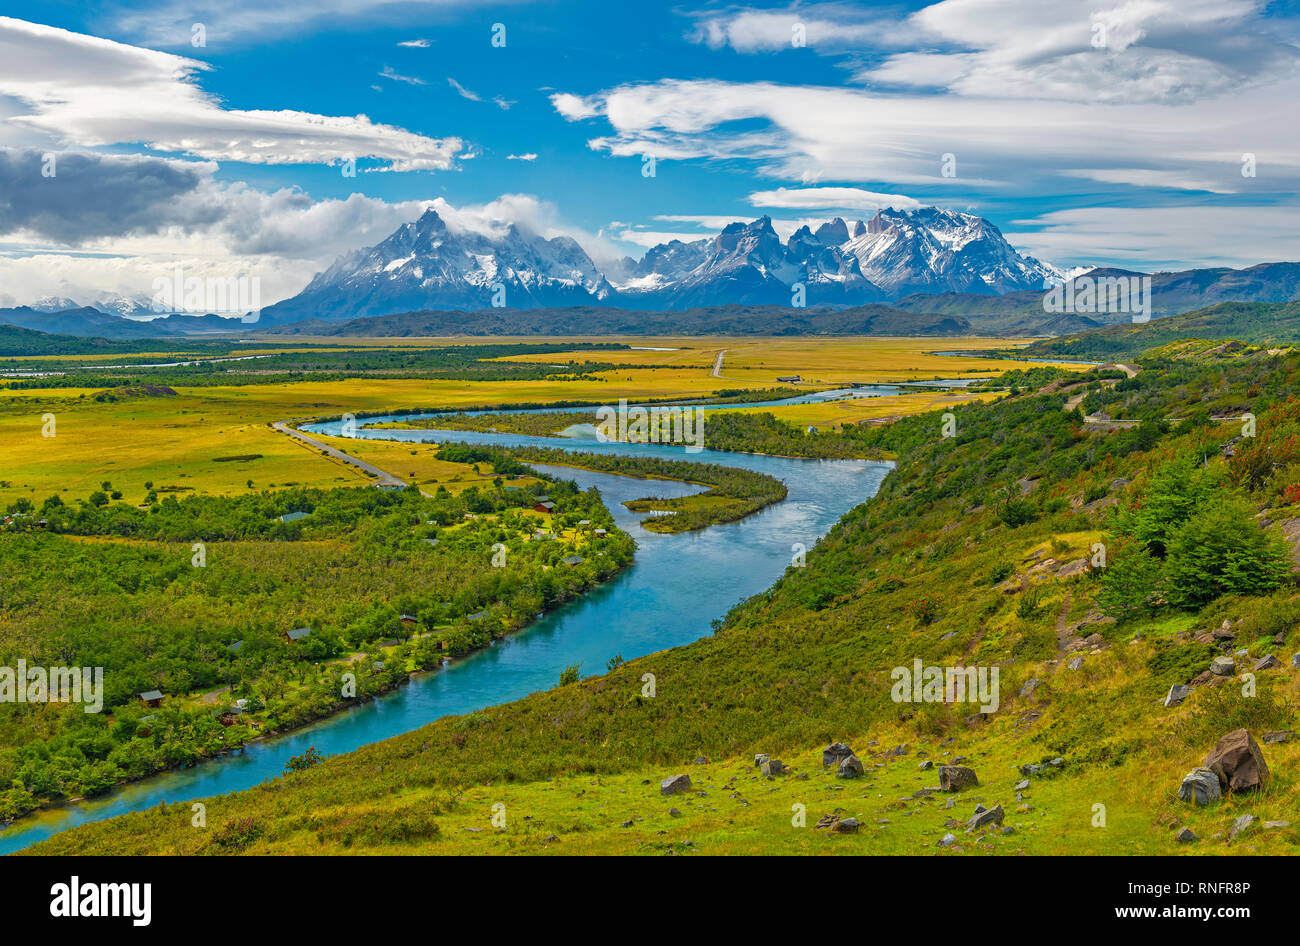 The majestic peaks of the Cuernos and Torres del Paine in summer, the turquoise Serrano river, Torres del Paine national park, Puerto Natales, Chile. Stock Photo